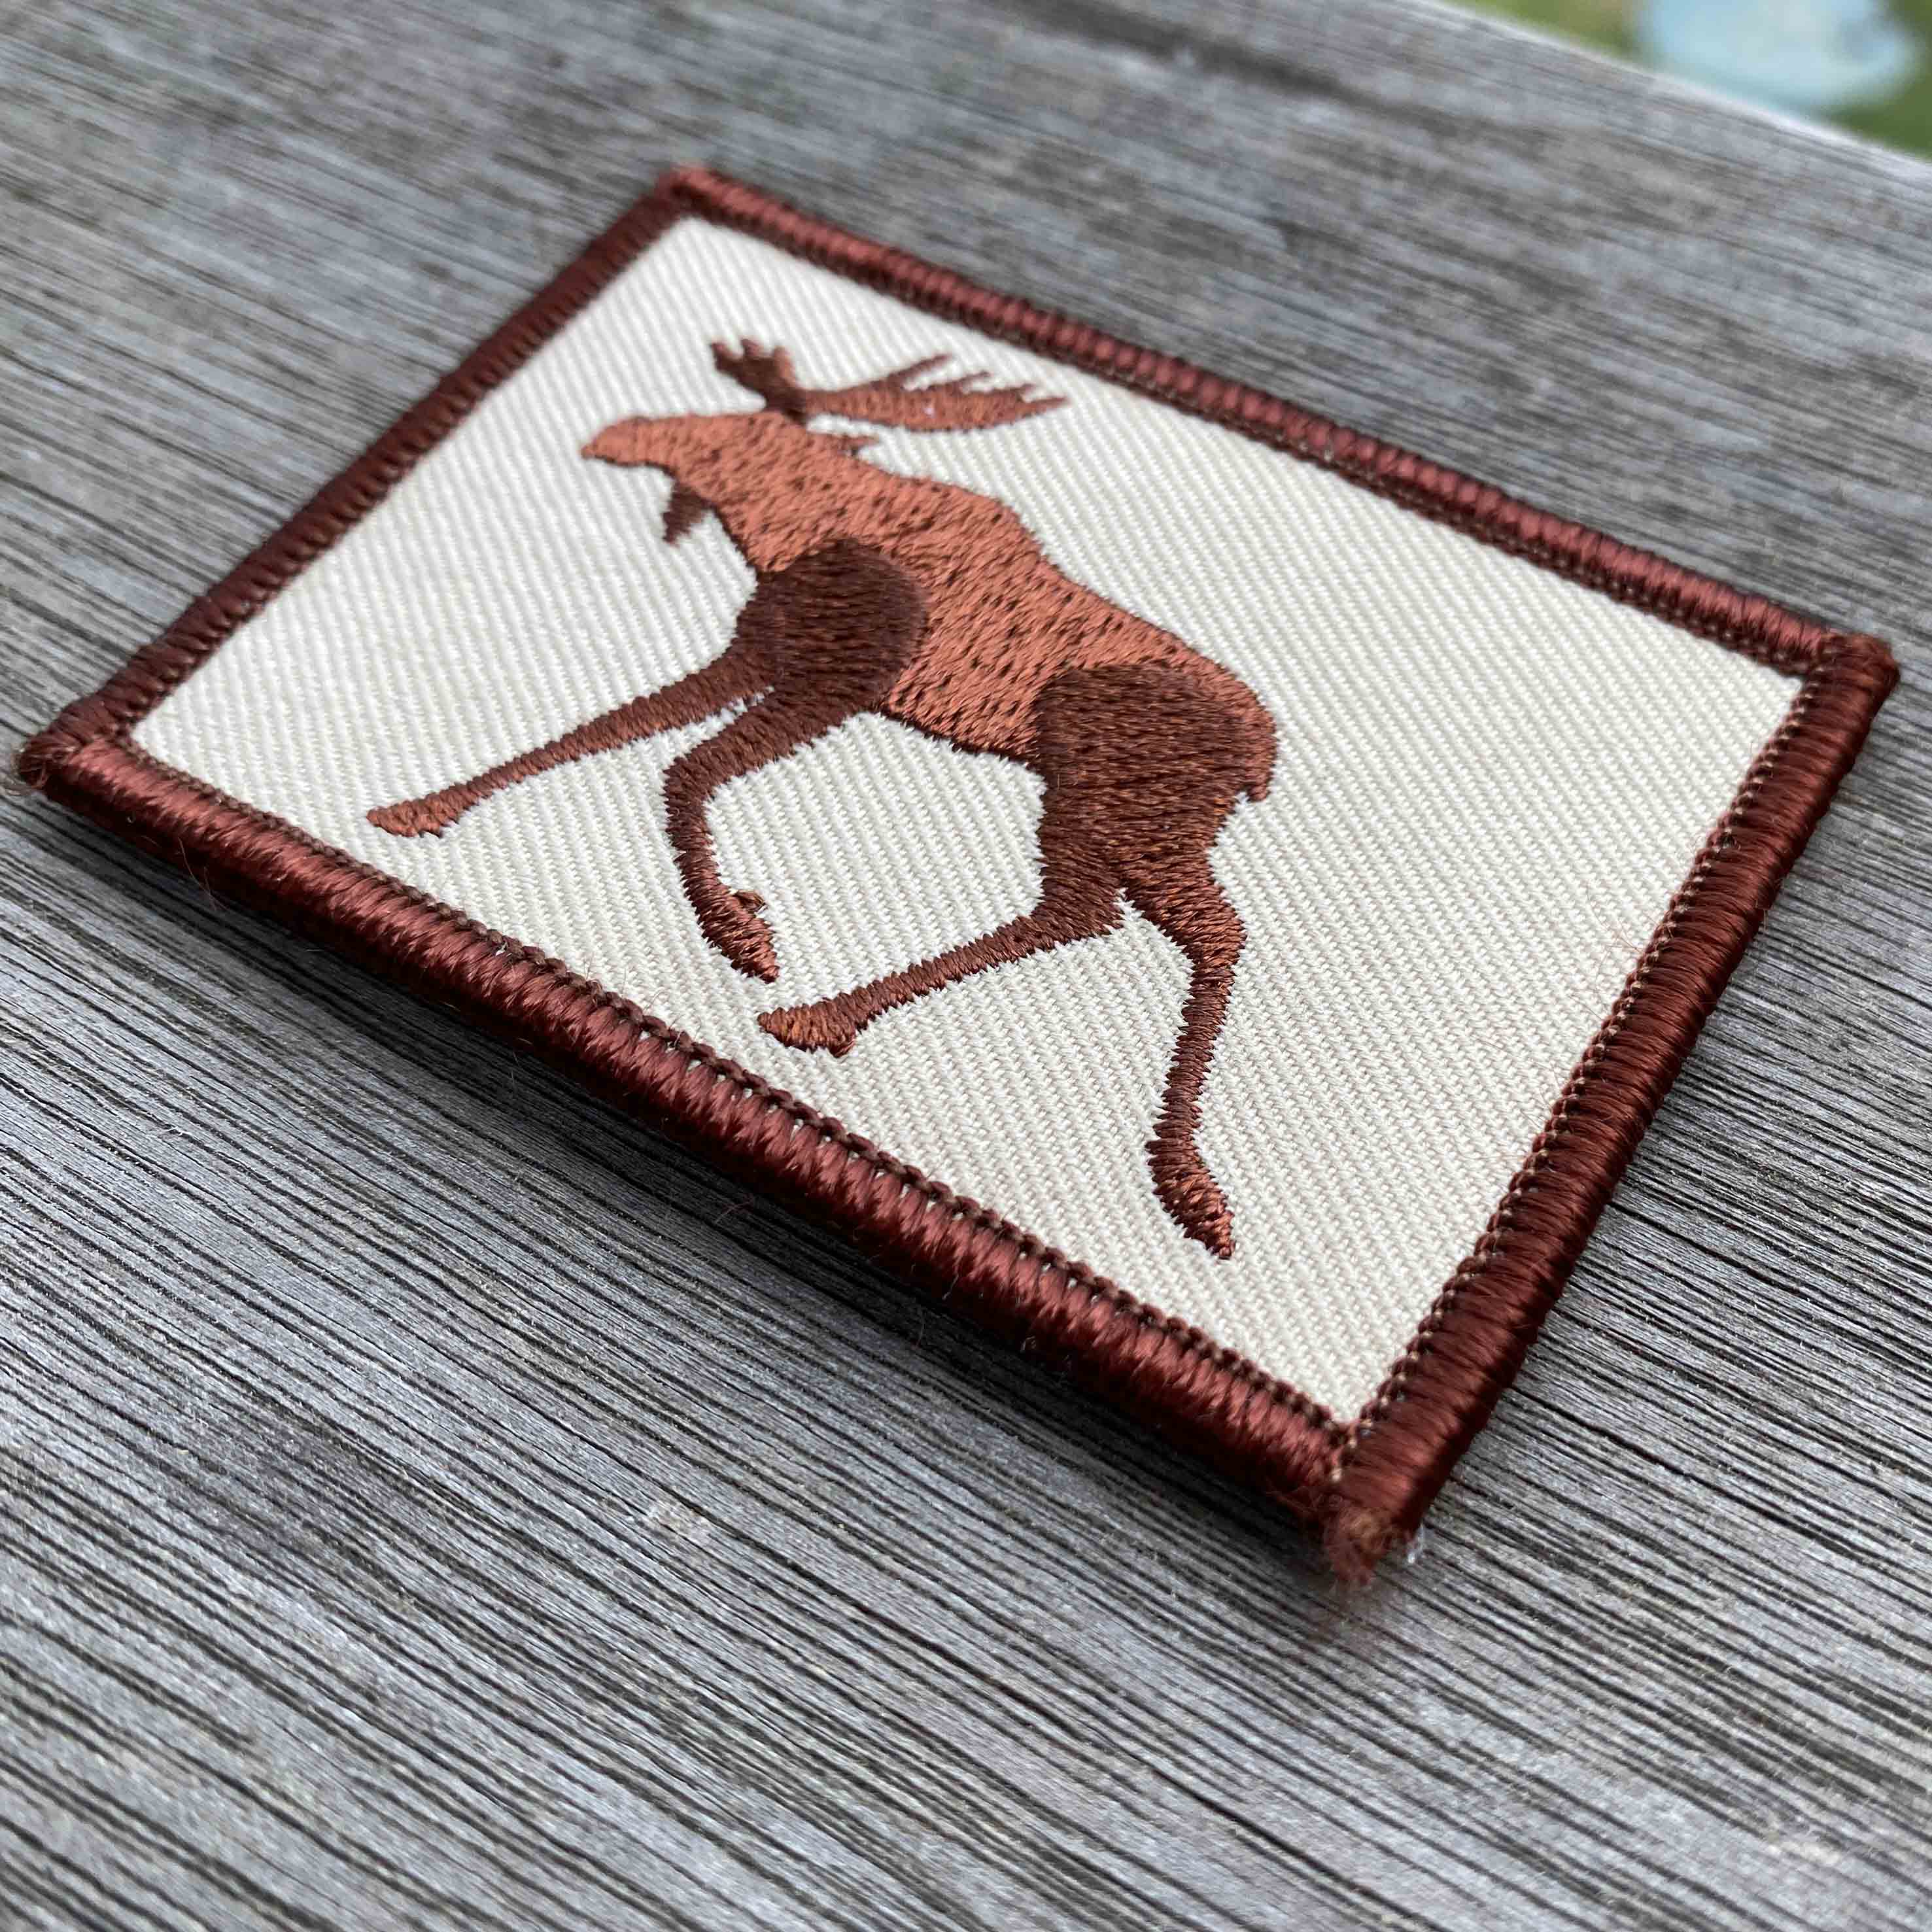 2"x3" Moose Tactical Patch